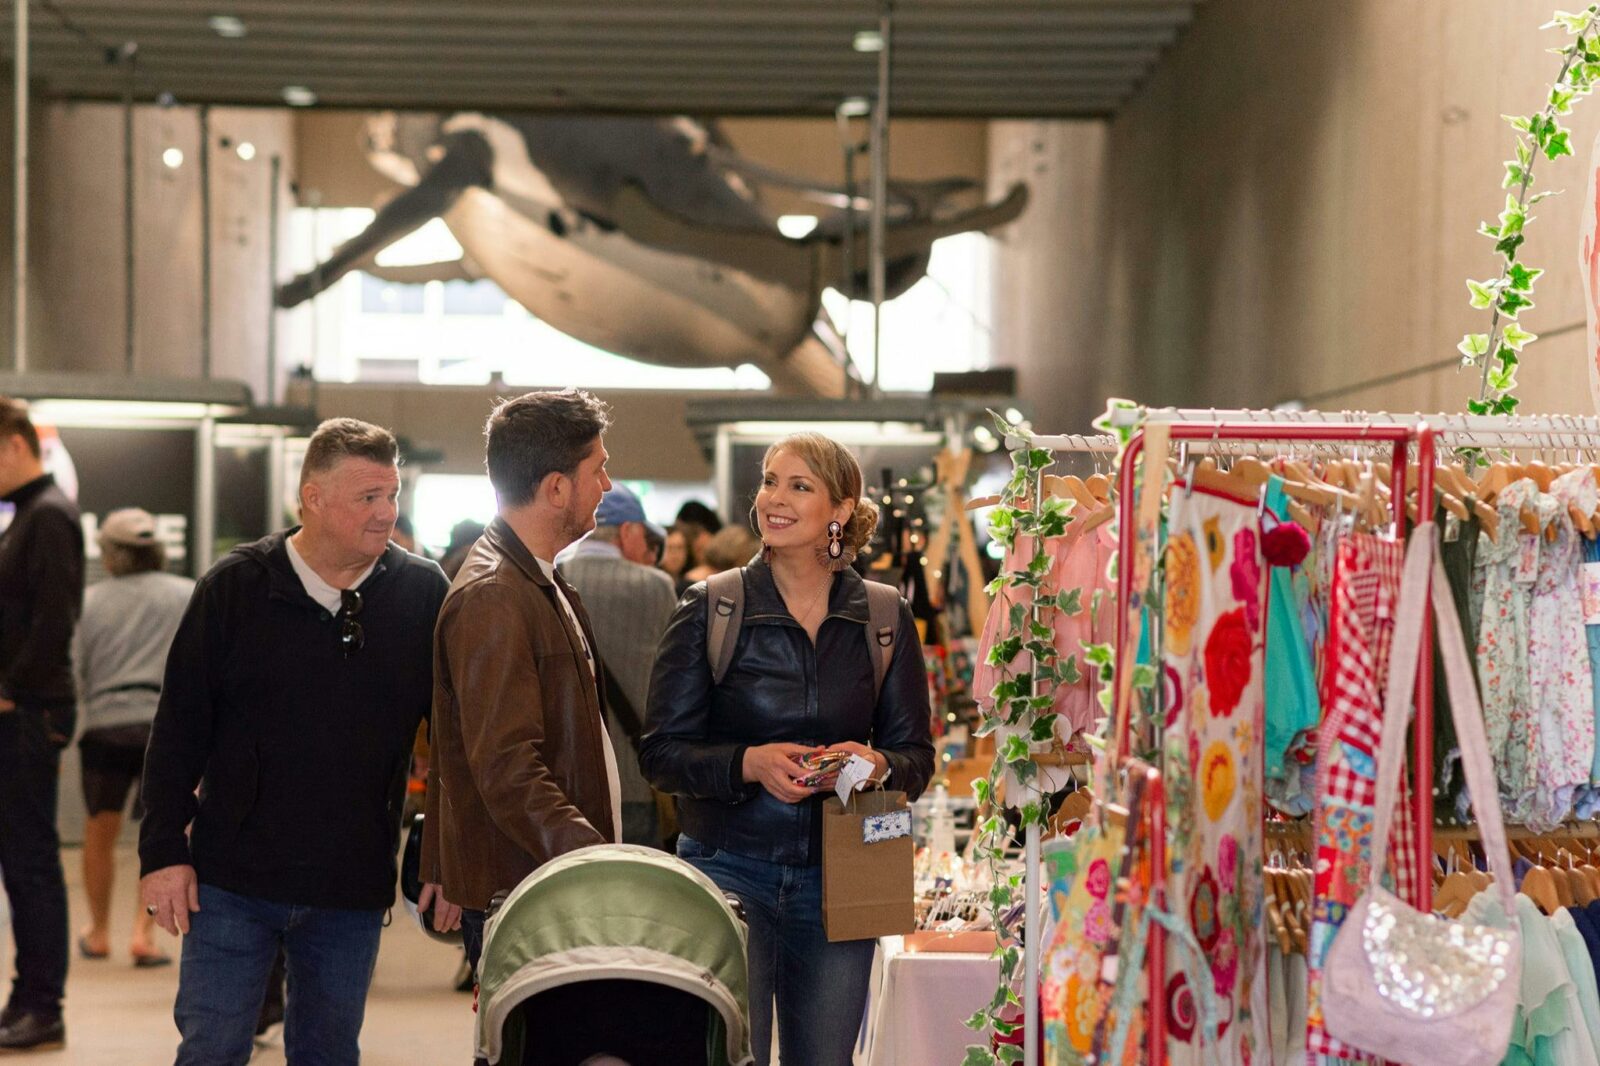 A Family smiling and shopping with the Flying whale installation in the background